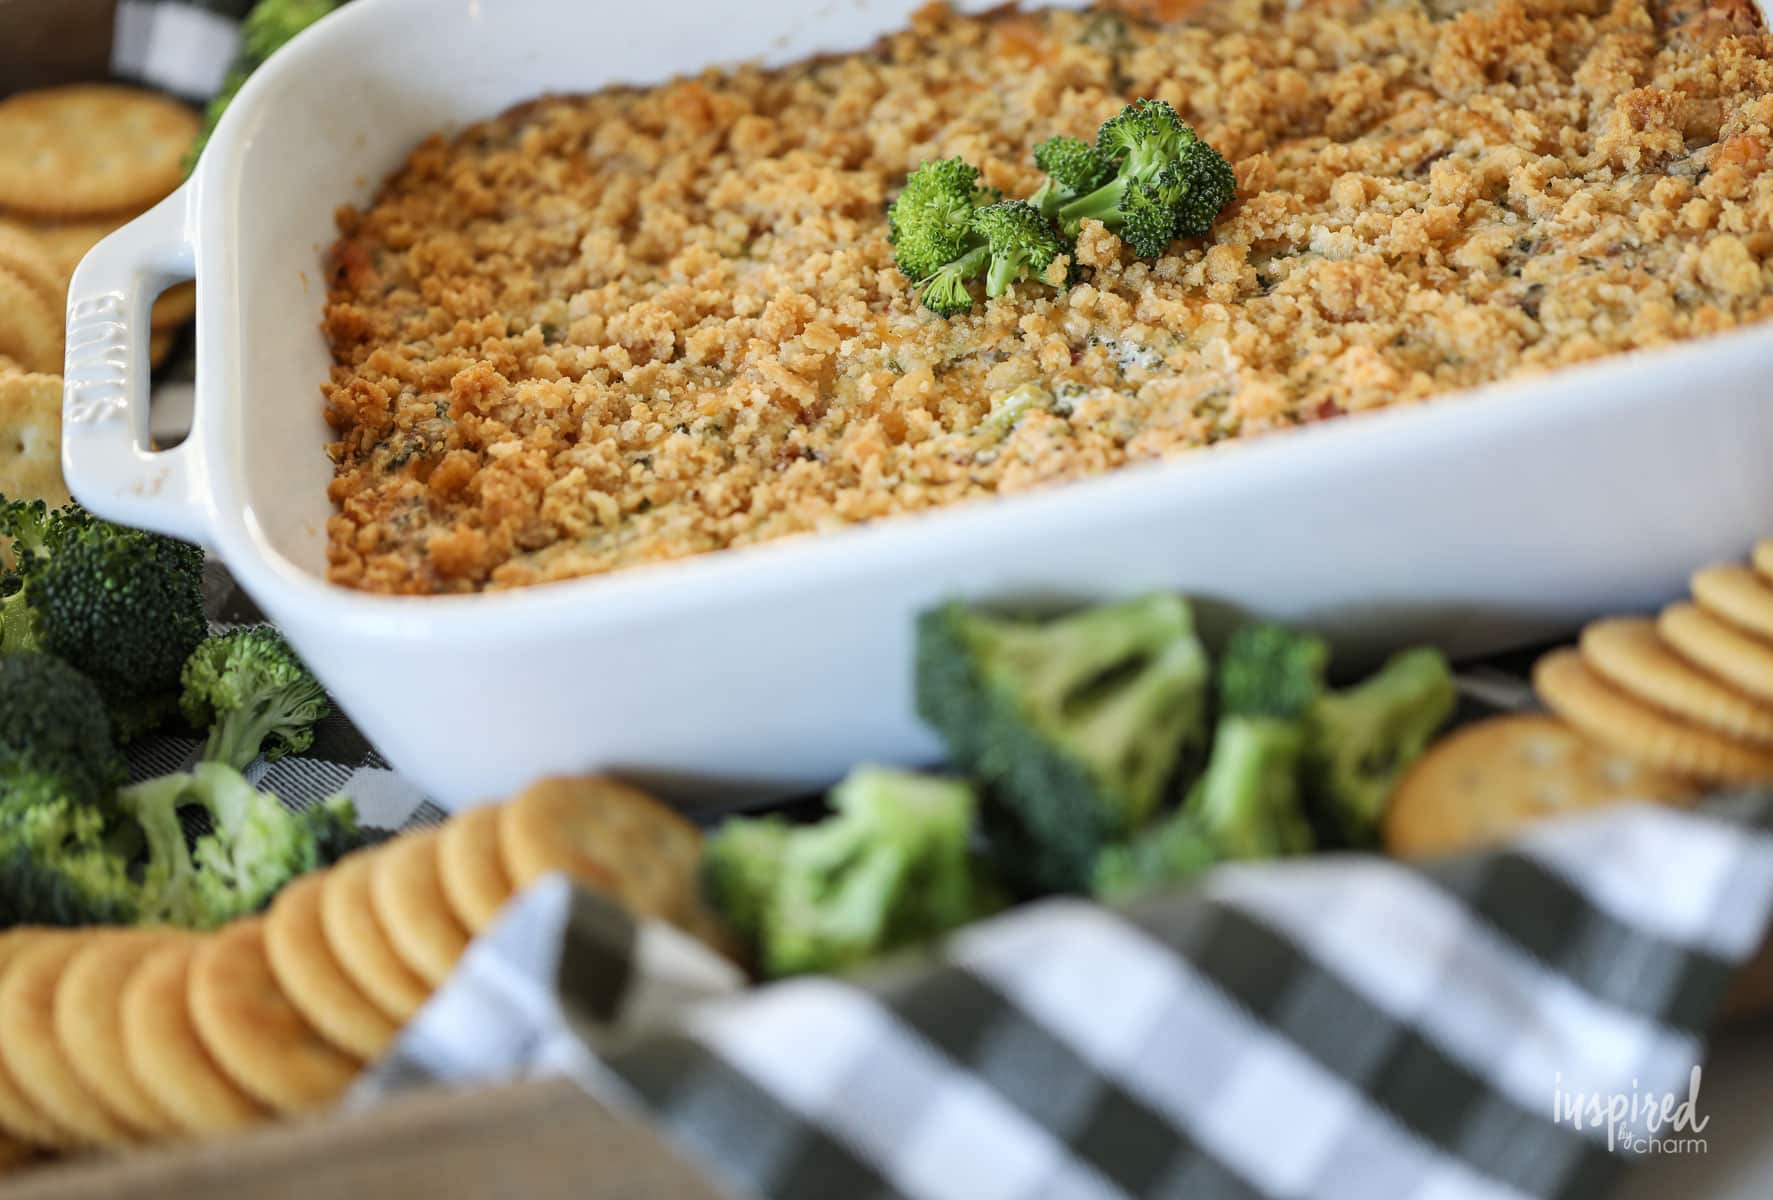 Need a tasty appetizer? Try this Broccoli Casserole Cheese Dip #broccoli #cheddar #bacon #cheese #appetizer #dip #recipe #appetizer